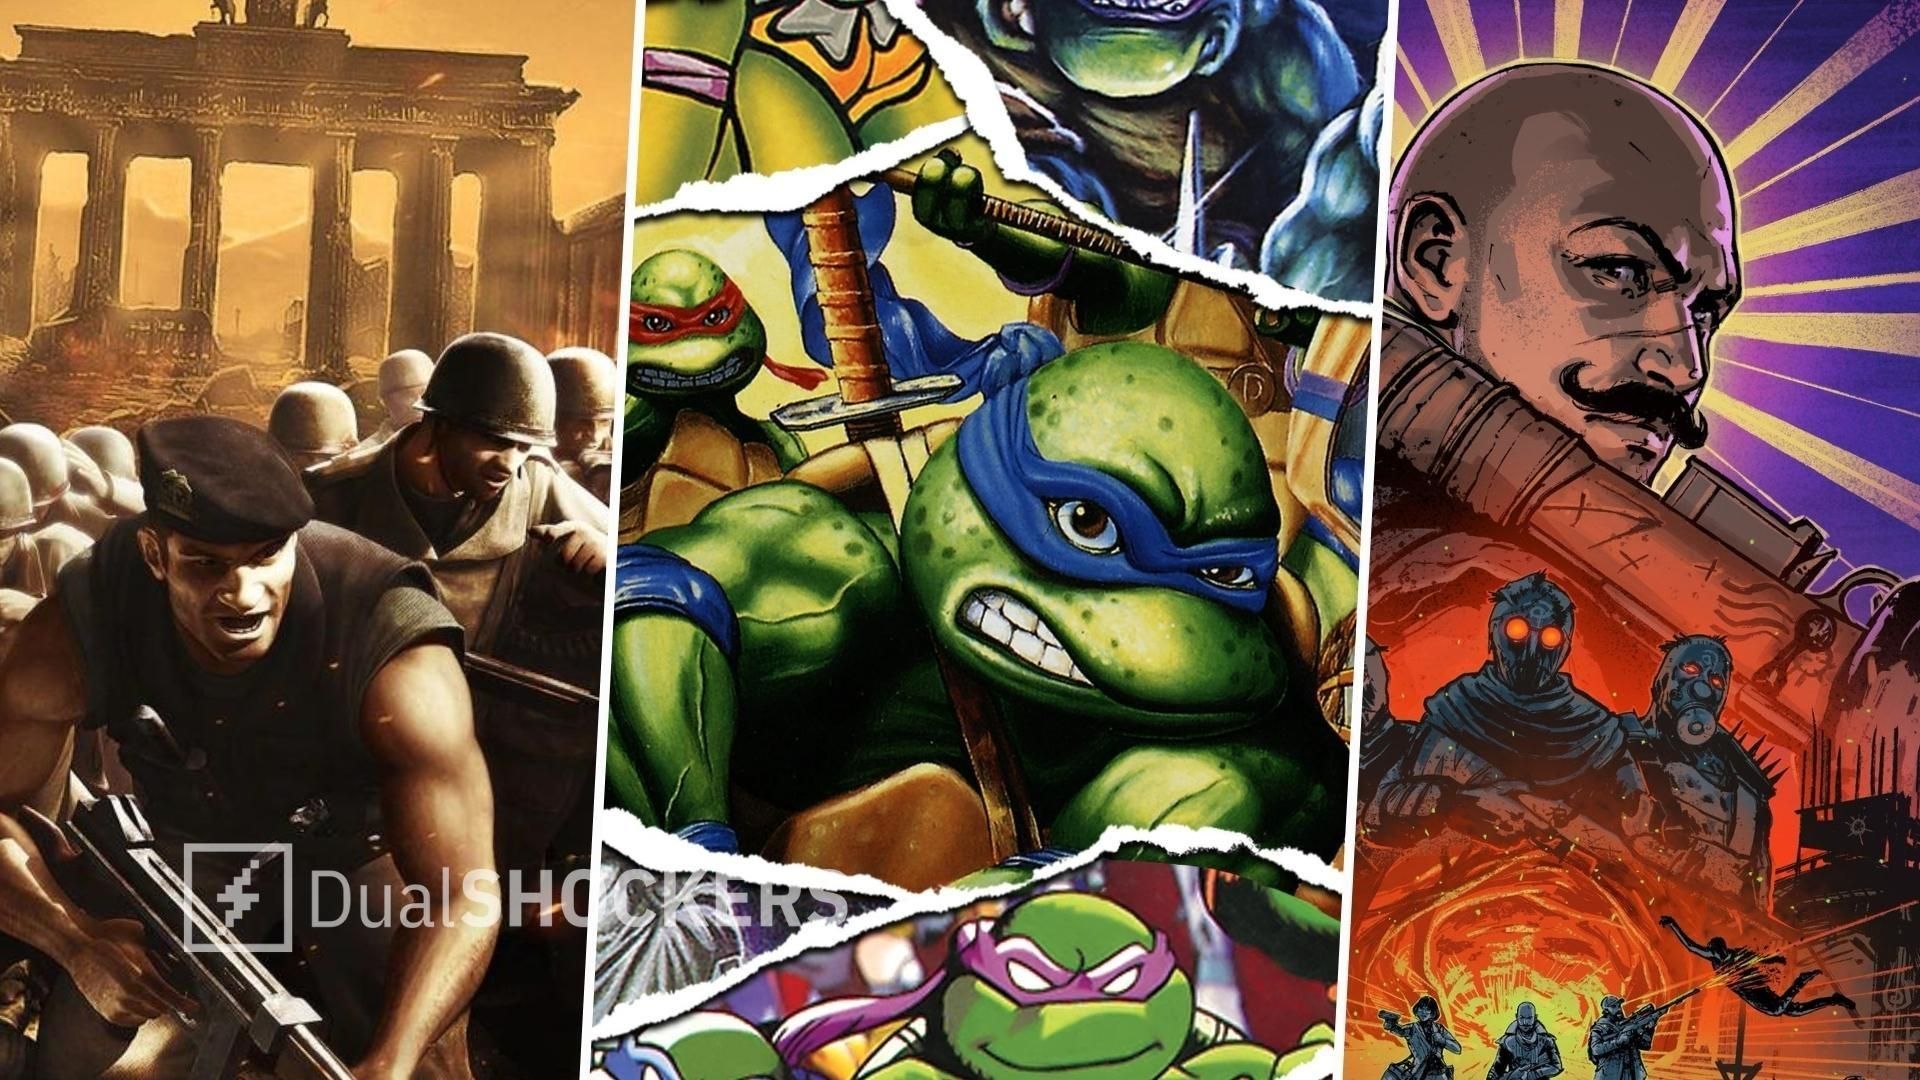 commandos 3 tmnt the cowabunga collection and back 4 blood children of the worm headling the new xbox releases this week